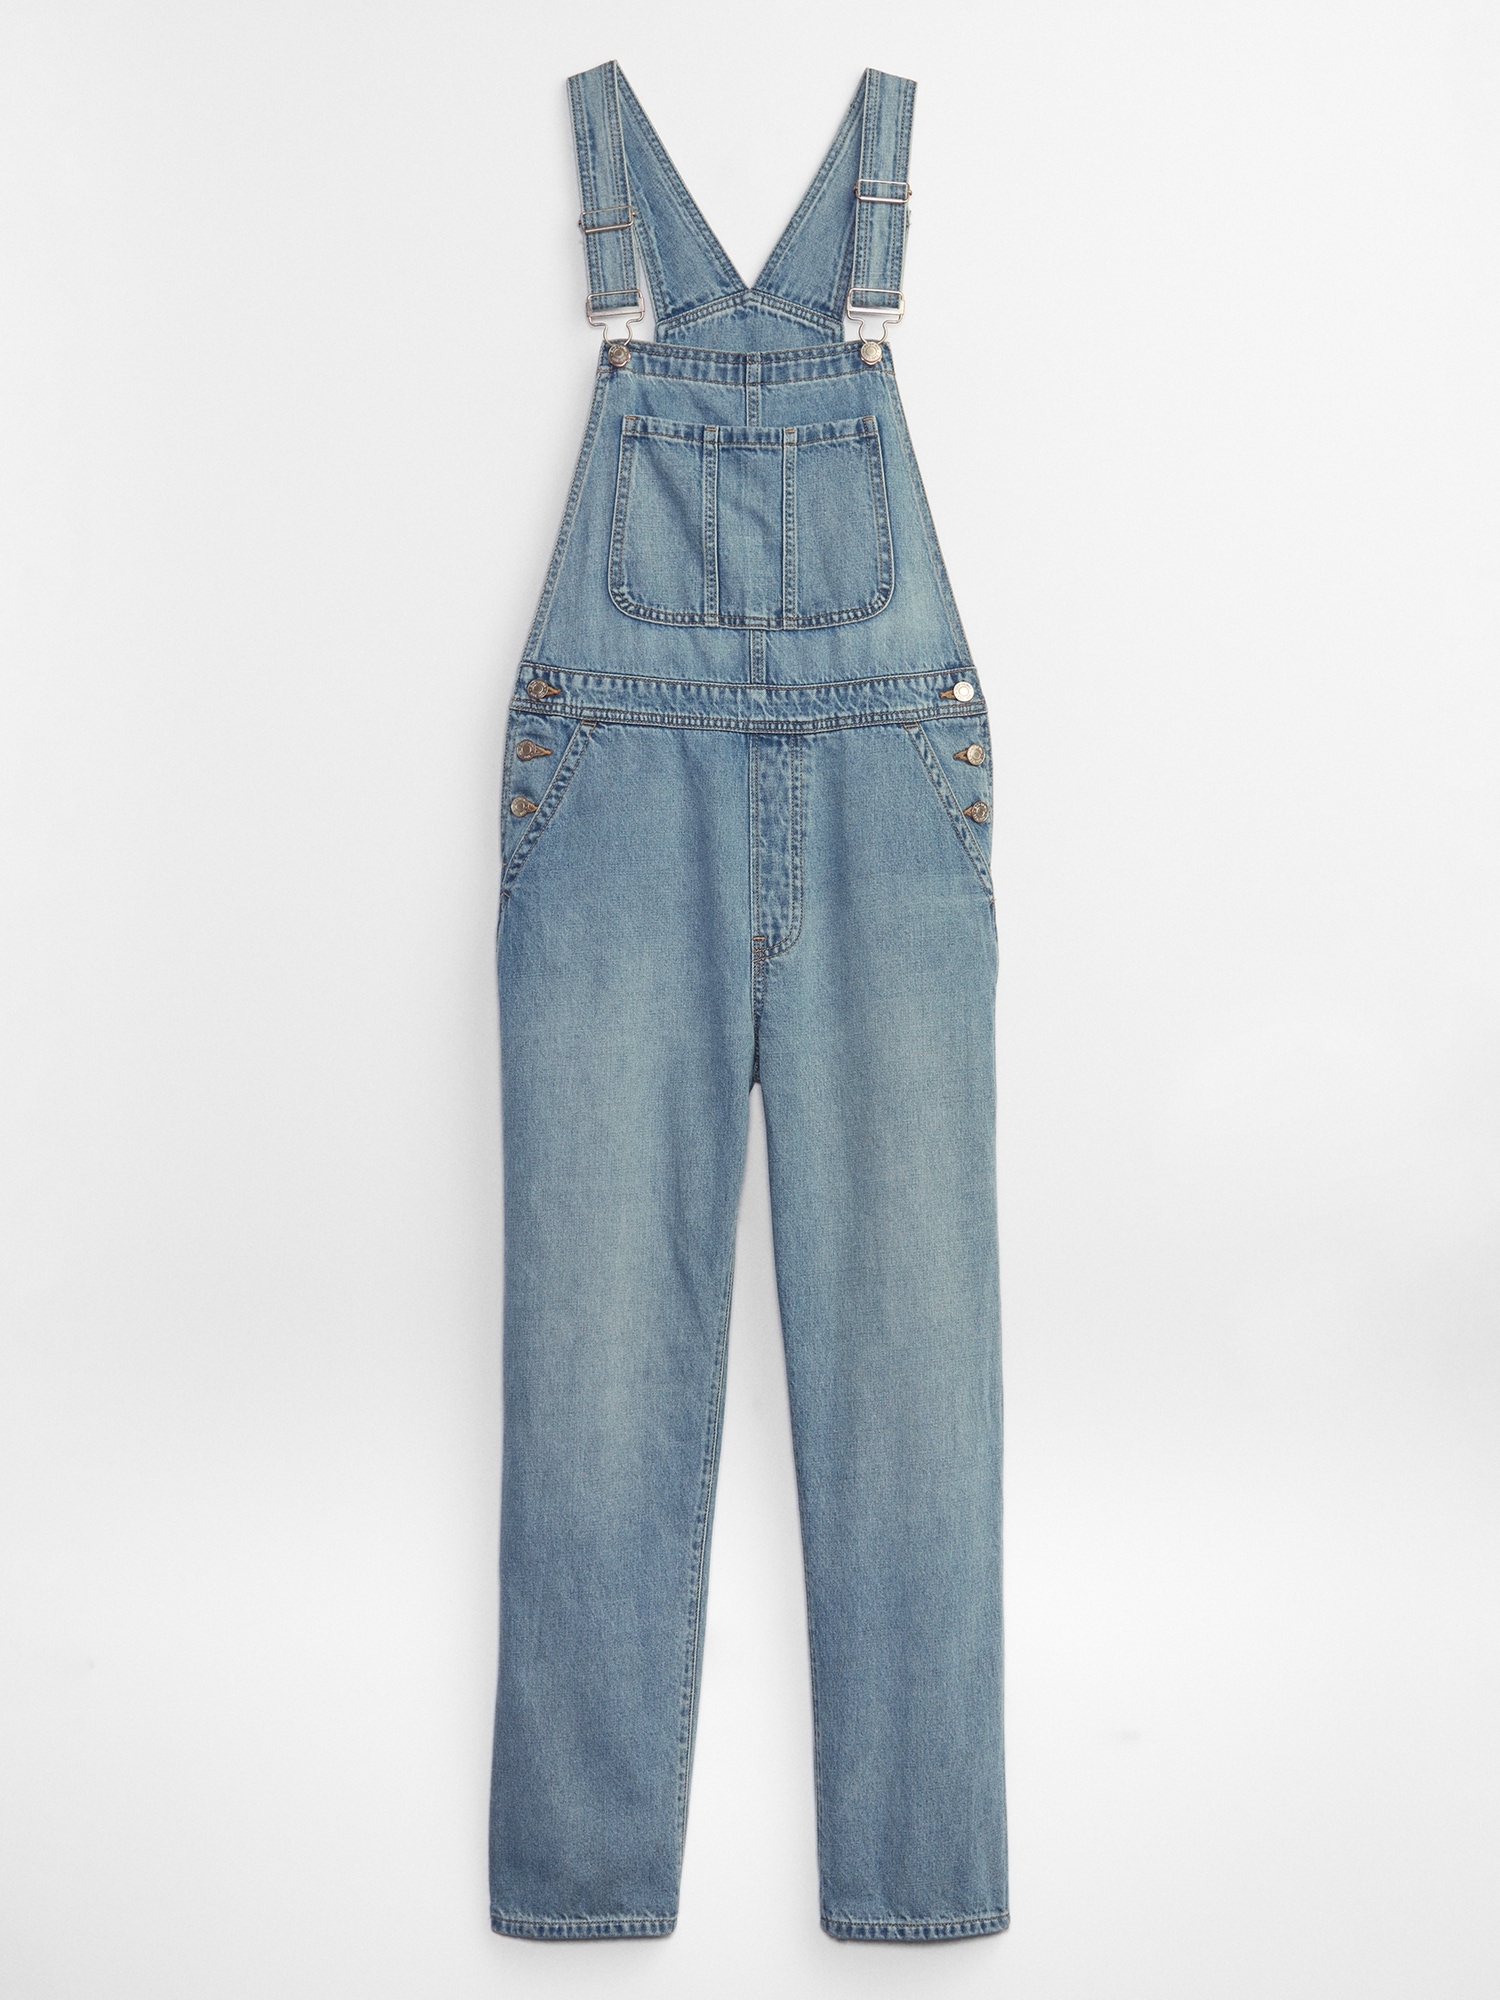 Slouchy Denim Overalls with Washwell | Gap Factory